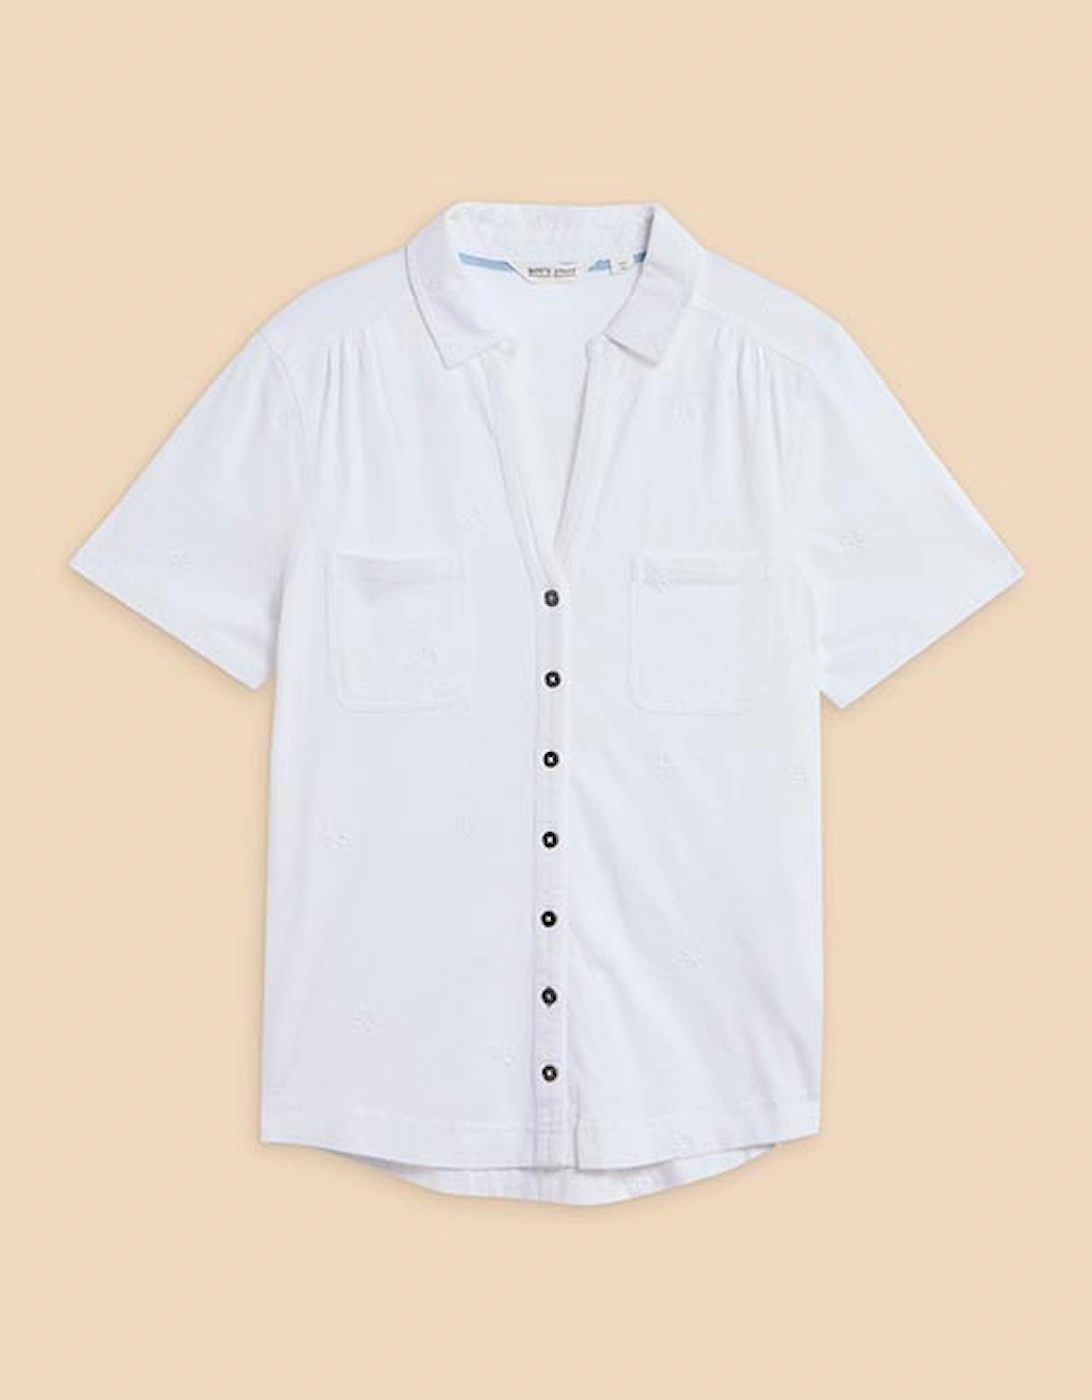 Women's Penny Pocket Embroidered Shirt Pale Ivory